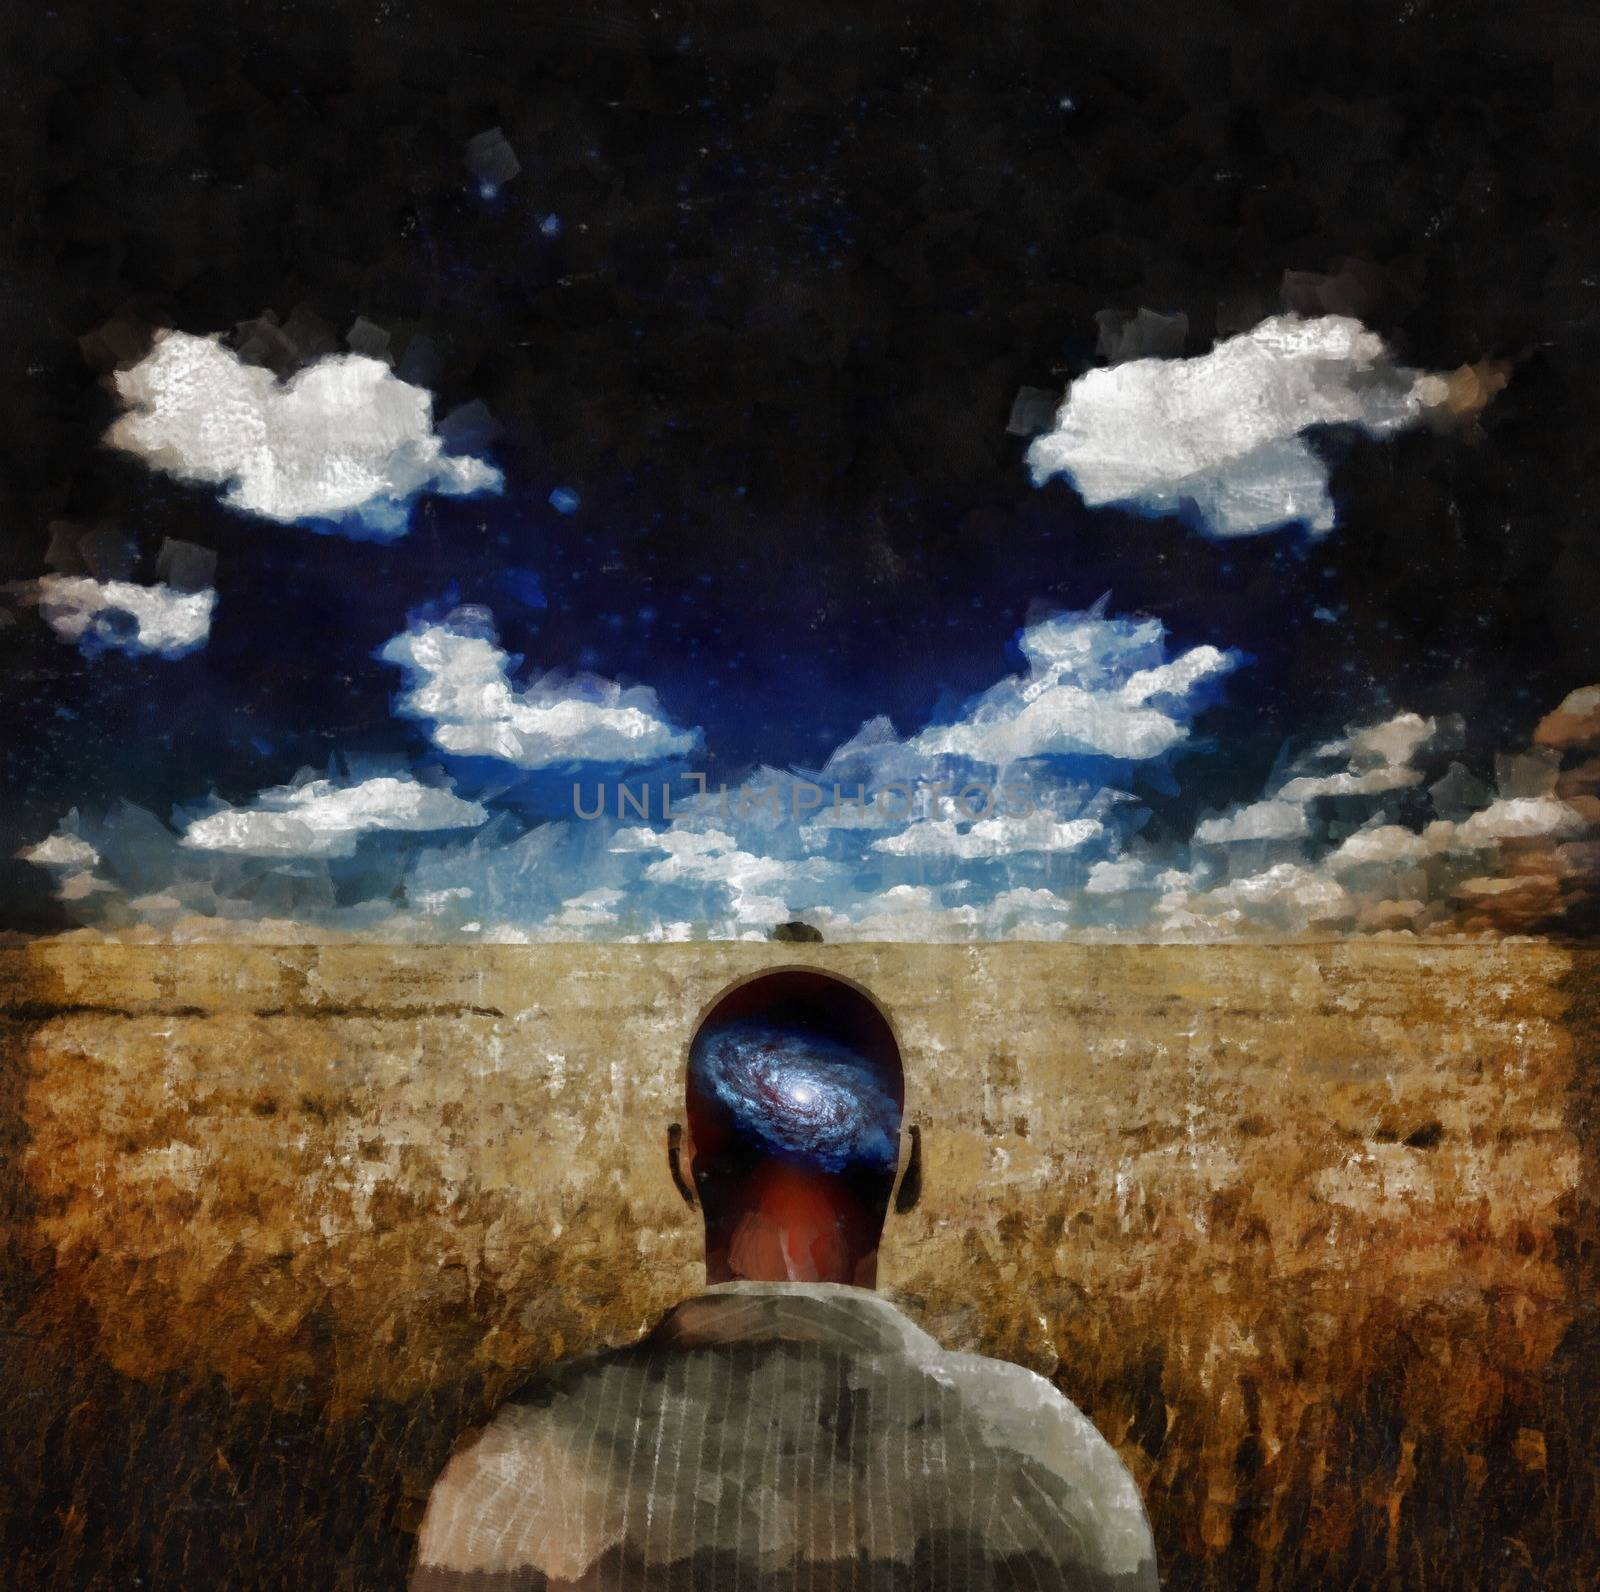 Surreal painting. Man with galaxy inside of his head stands in the field of wheat.